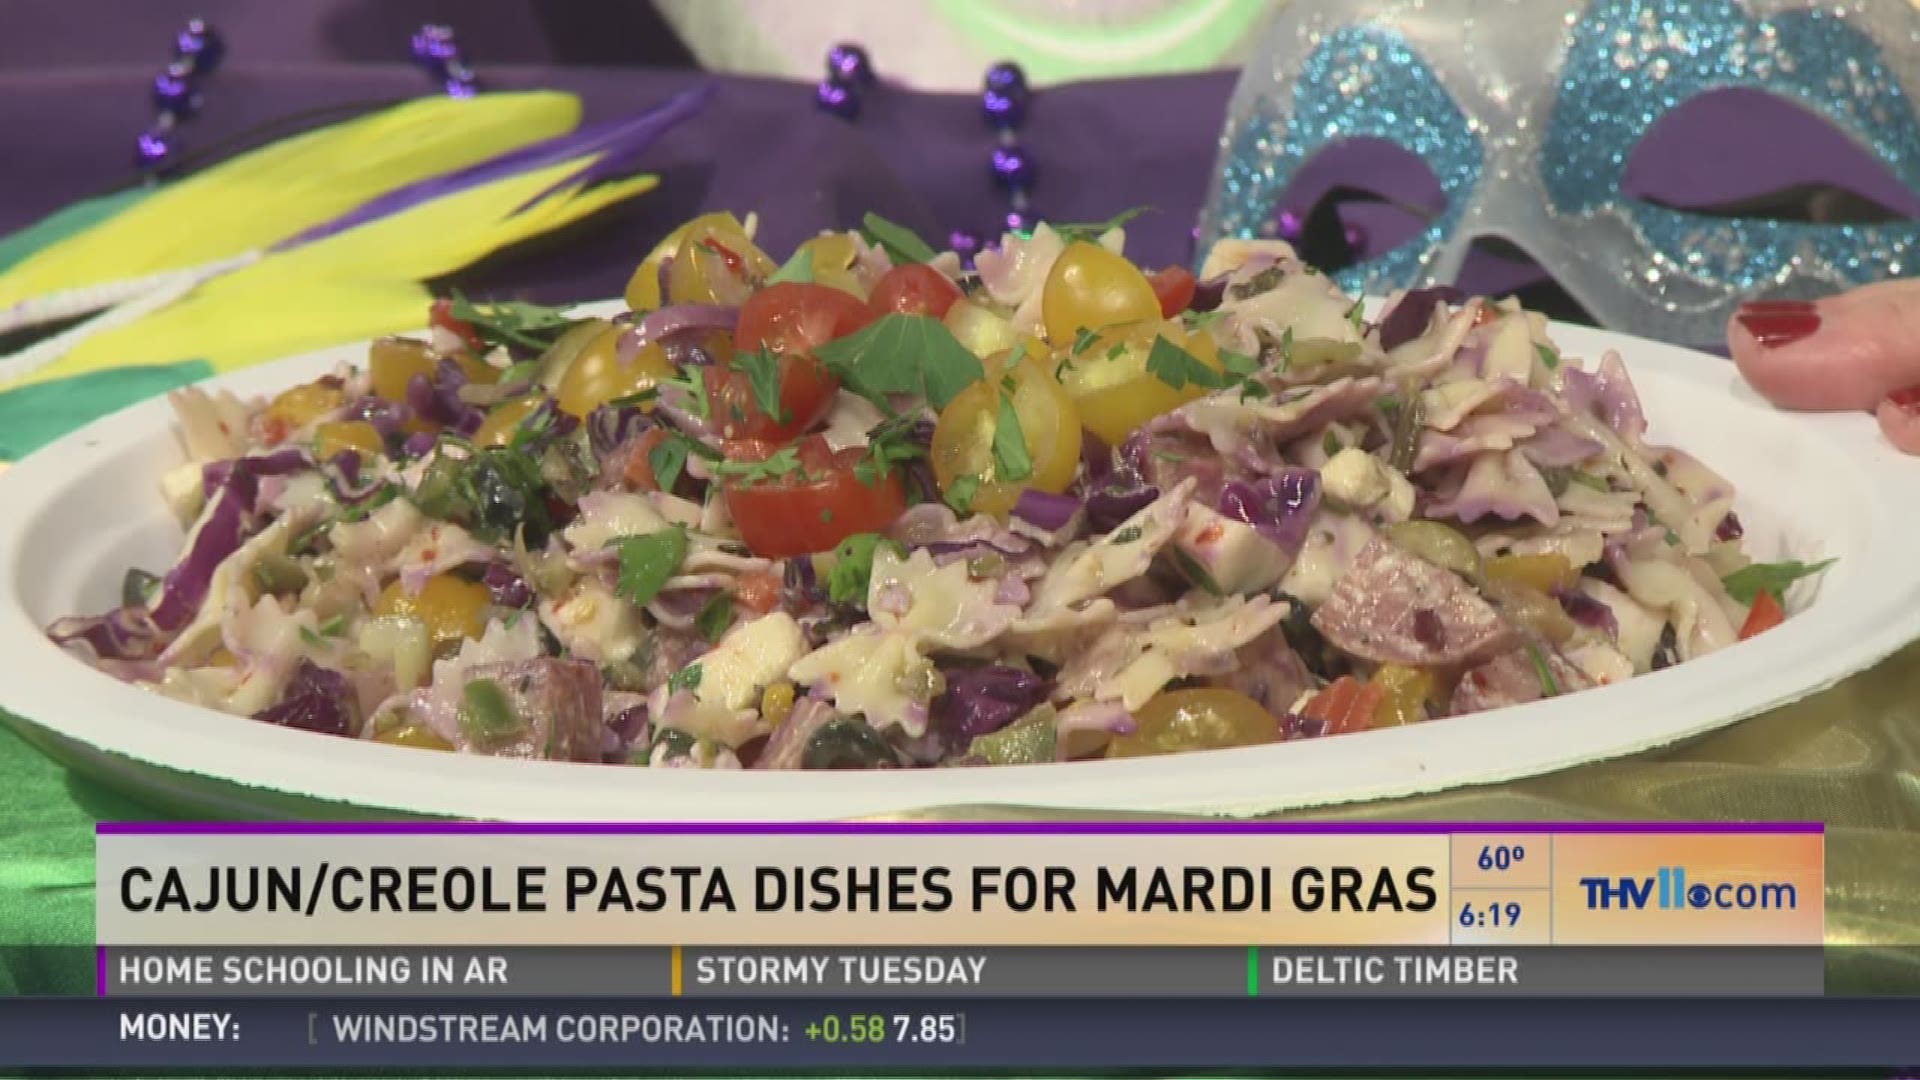 Food blogger Debbie Arnold joined THV11 This Morning to fatten us up with some Cajun and Creole pasta dishes